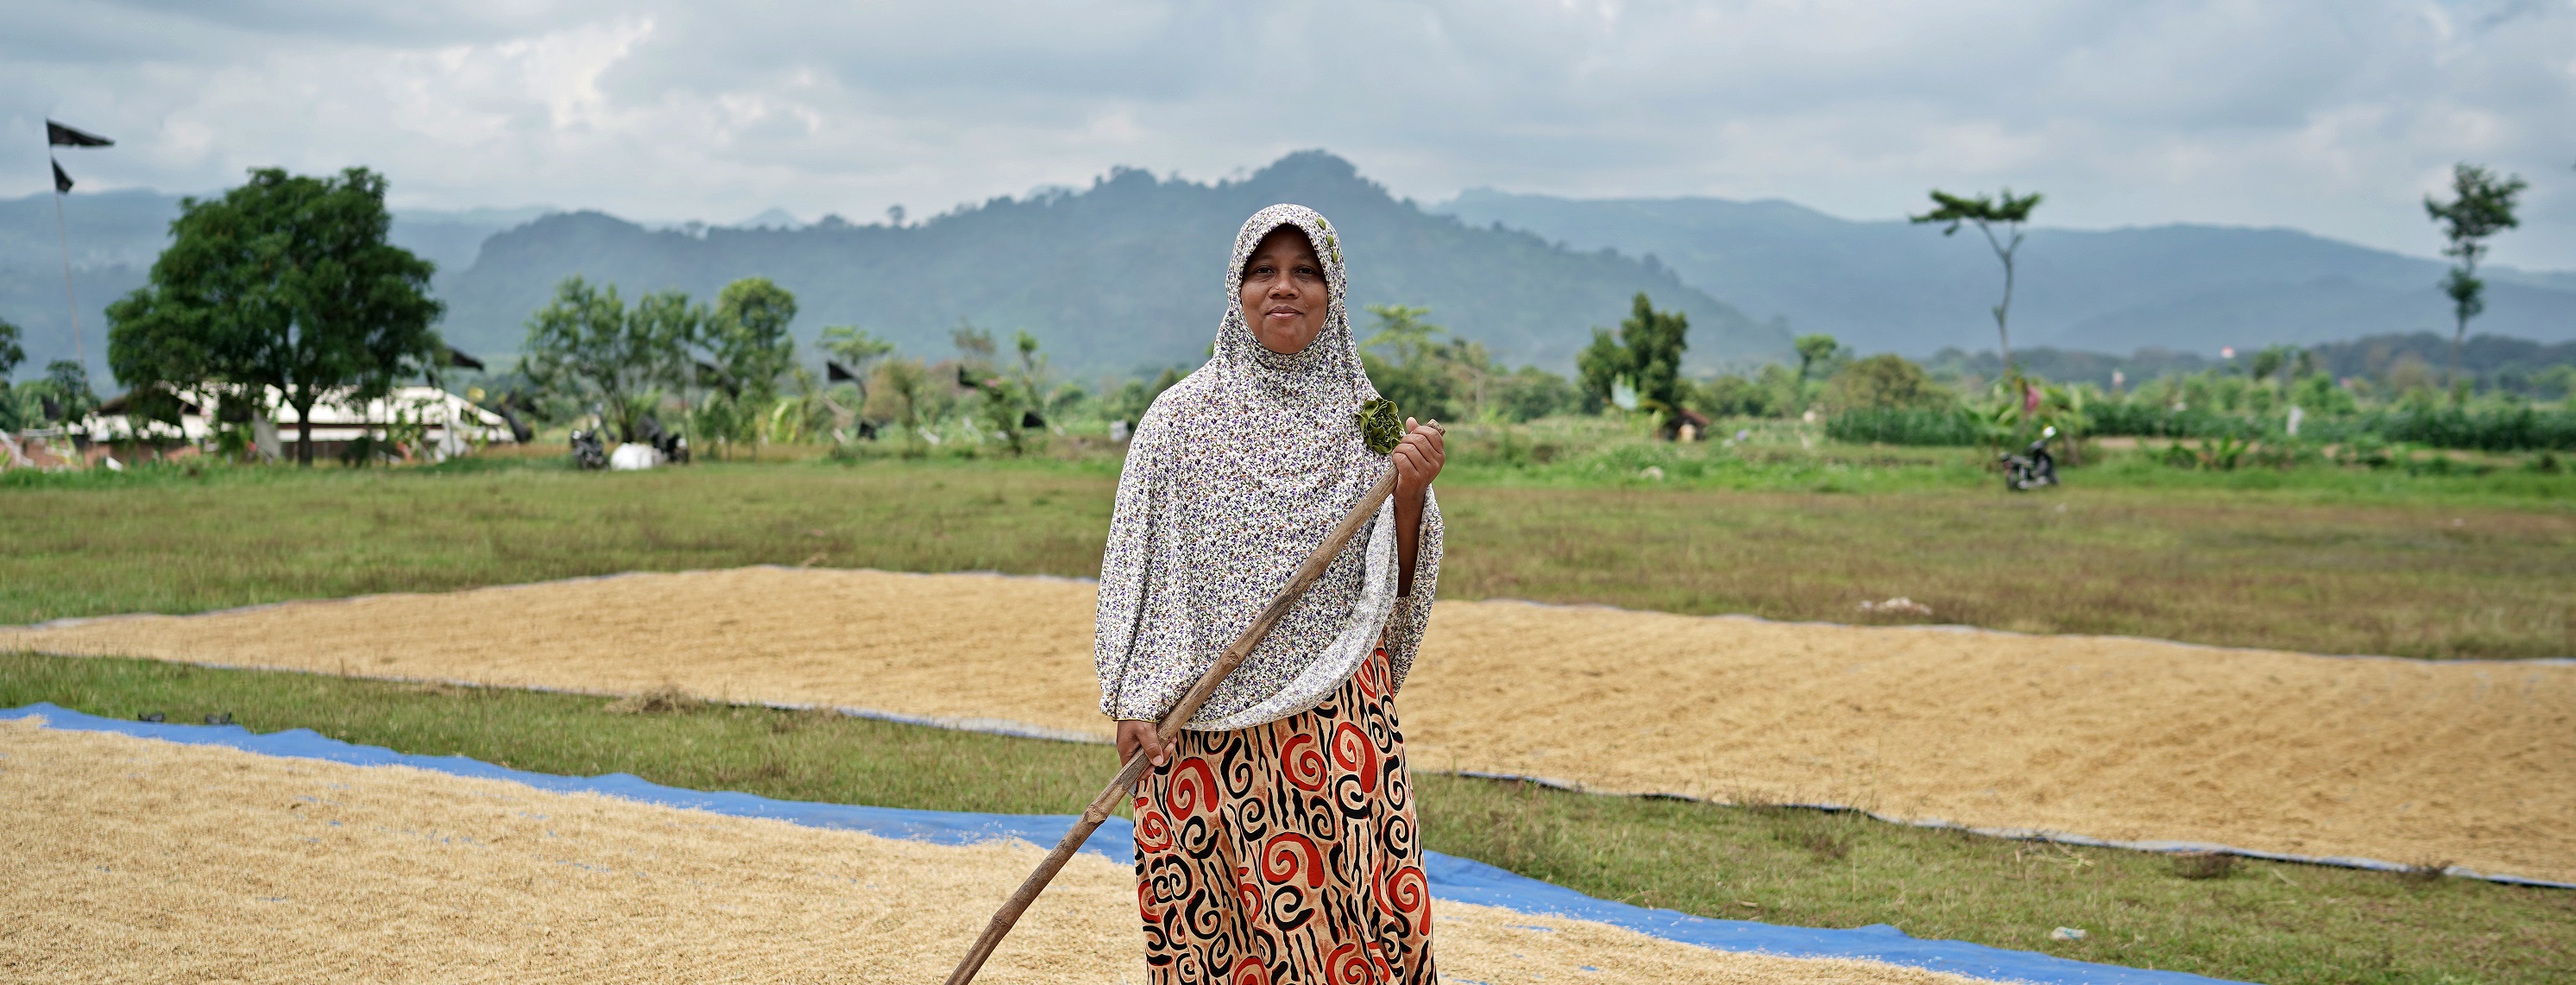 a woman poses while drying grain in the middle of the field